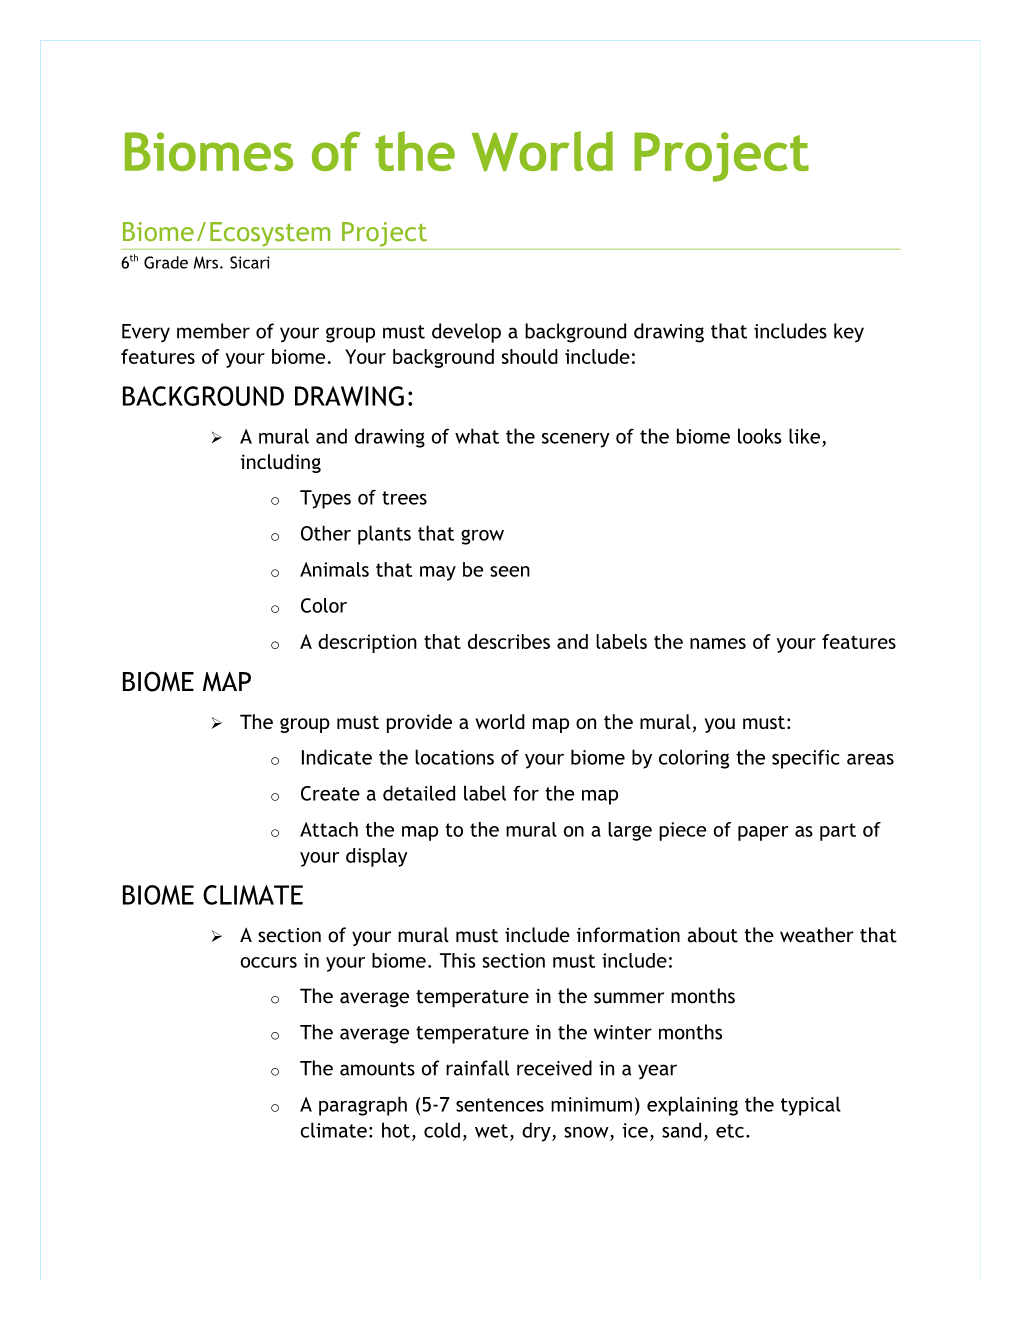 Biomes of the World Project